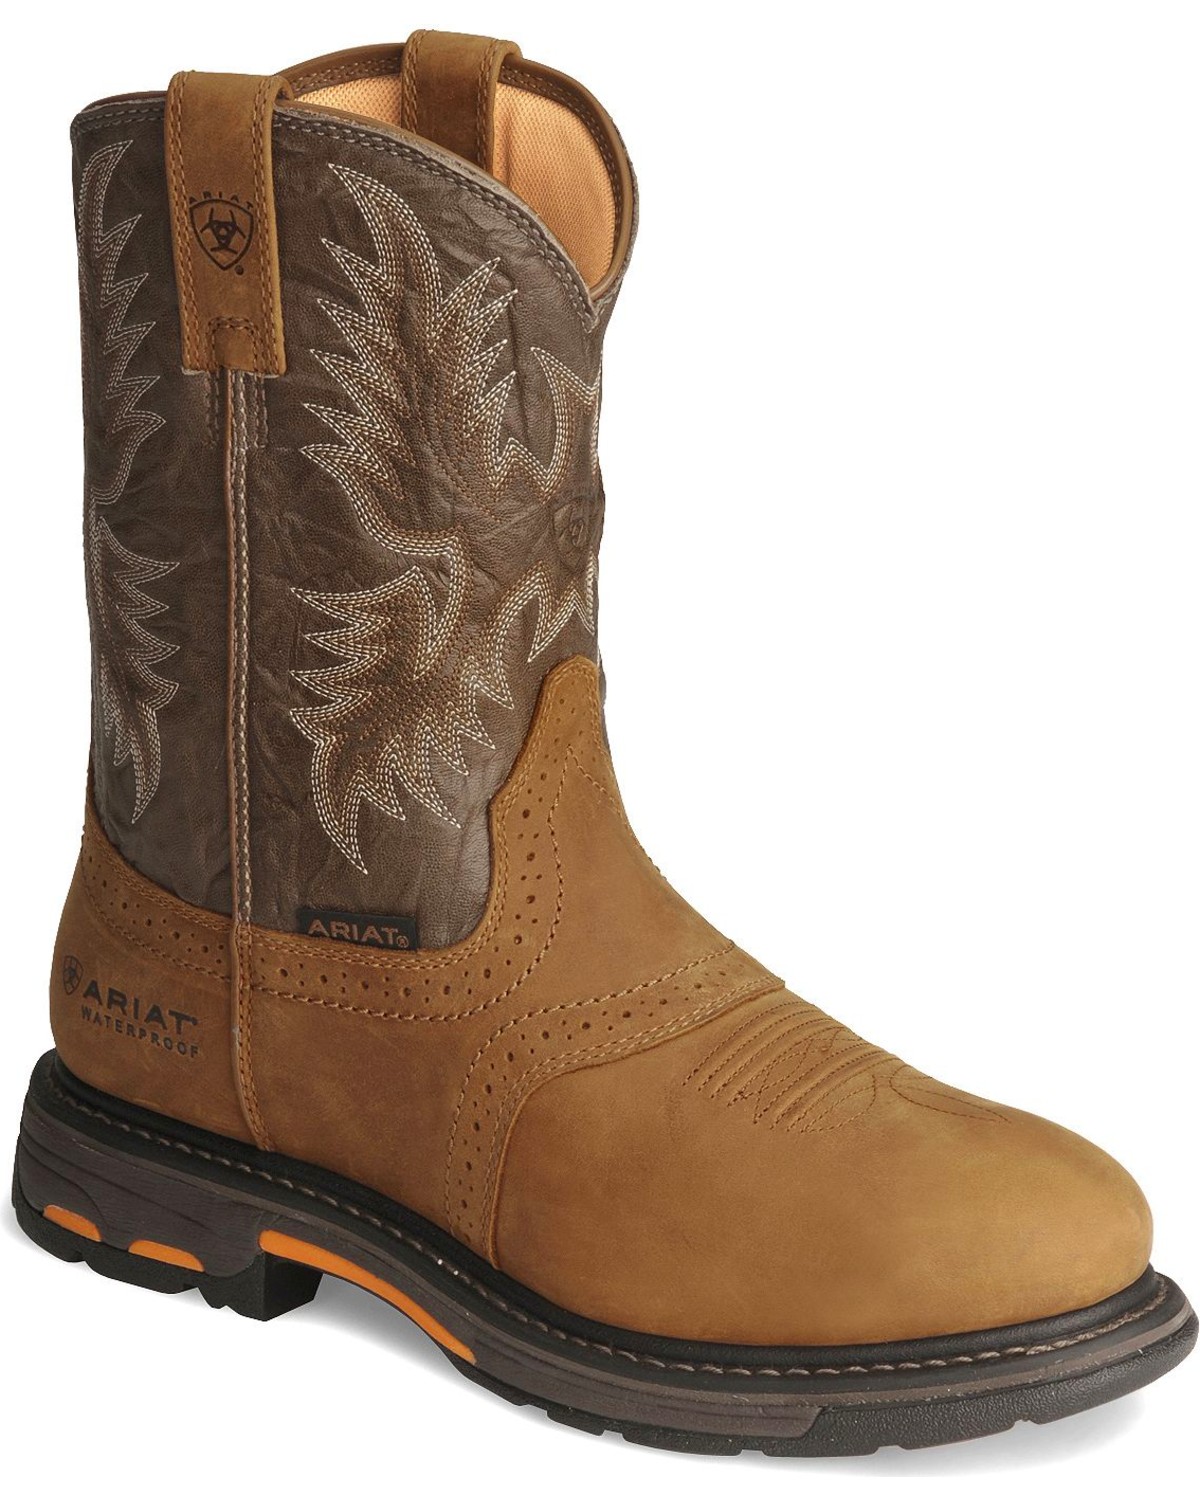 Ariat boots are new craze for Winters